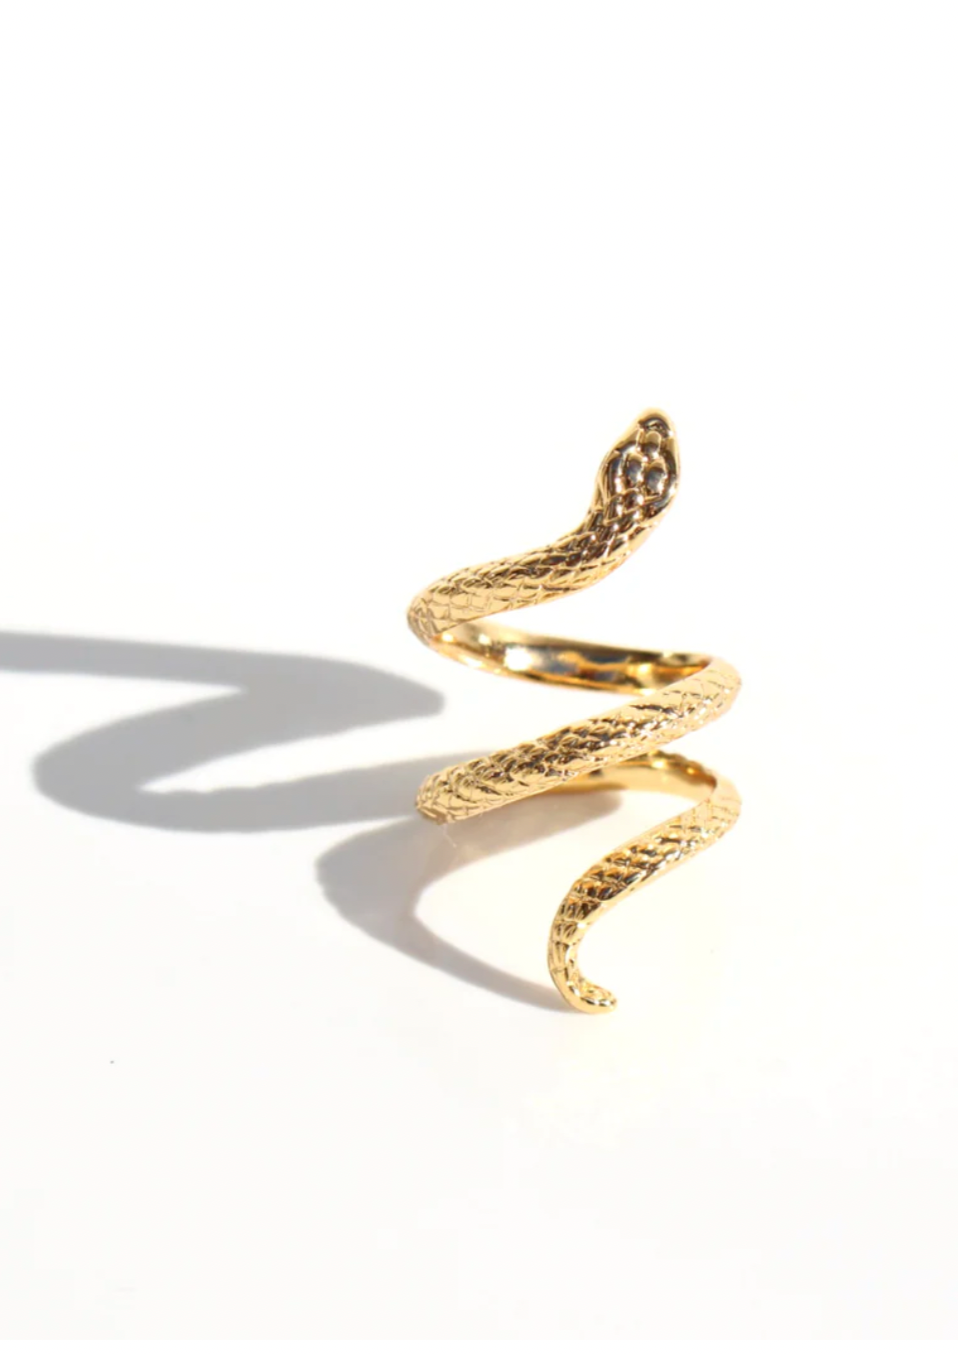 Snake Ring - Gold, by Queen of the Foxes Snake rings are symbols of eternal love and we are totally in love with these...  DETAILS:  Adjustable  2cm diameter  Brass | Plated